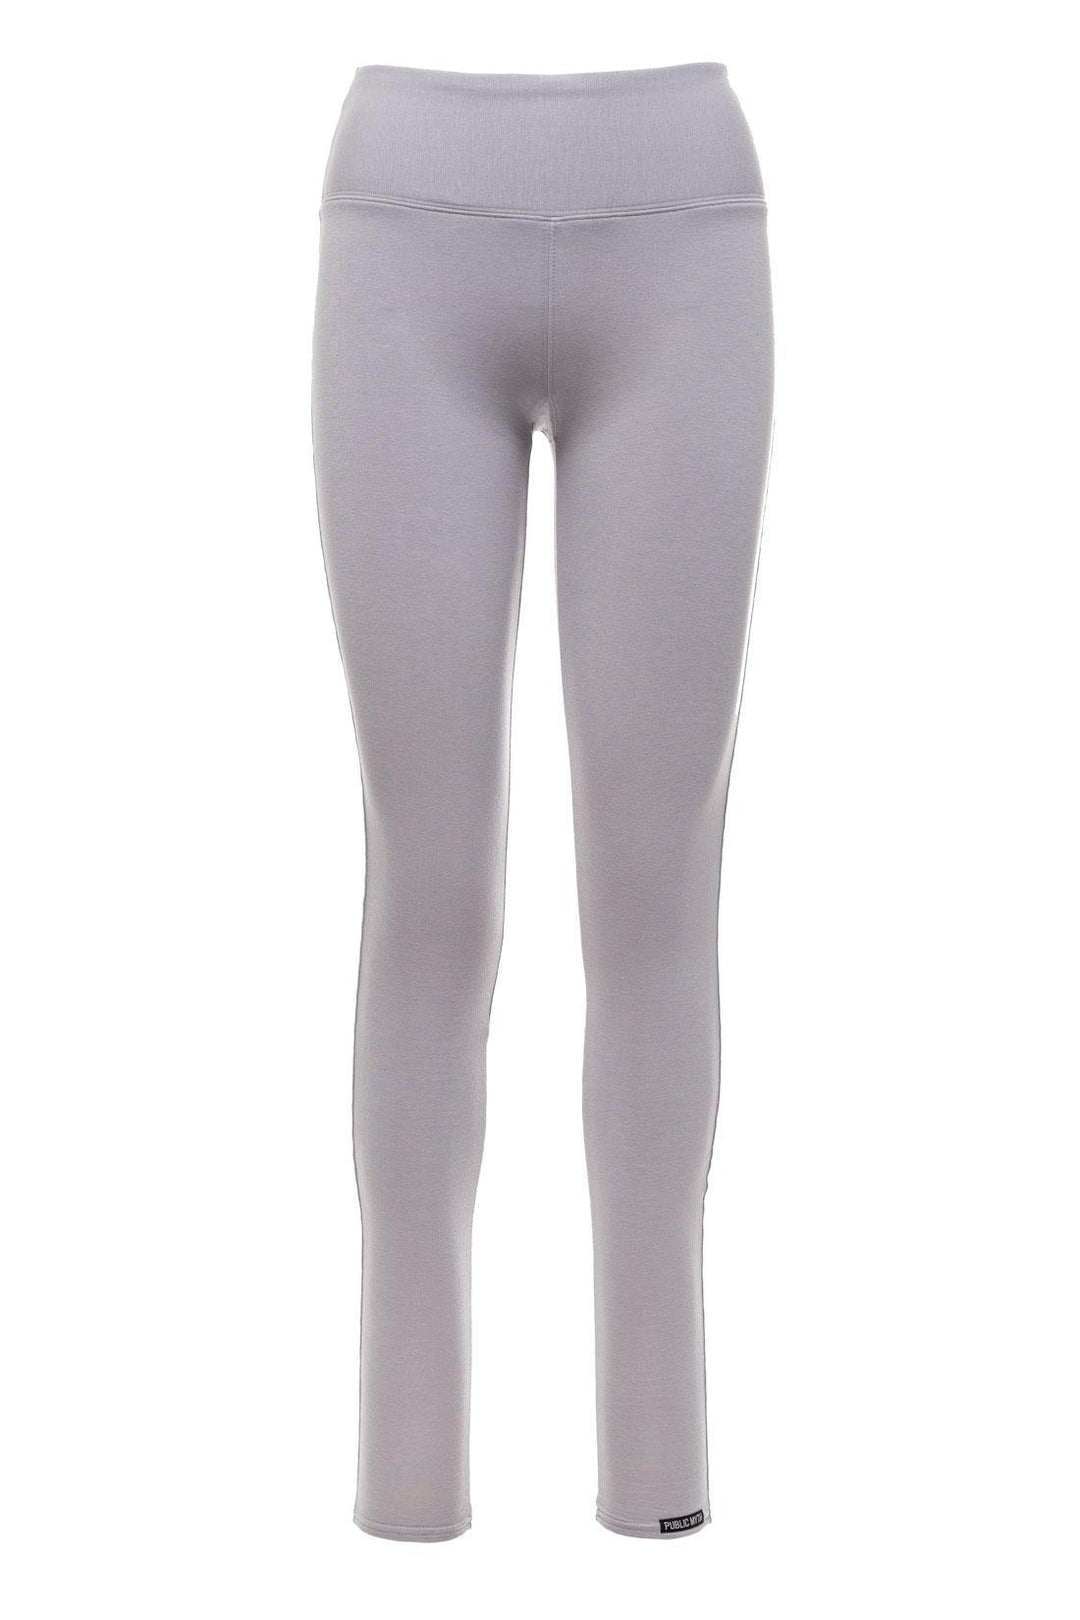 90 Degree By Reflex, Pants & Jumpsuits, 9 Degree By Reflex Gray Sheen Cut  Out Leggings